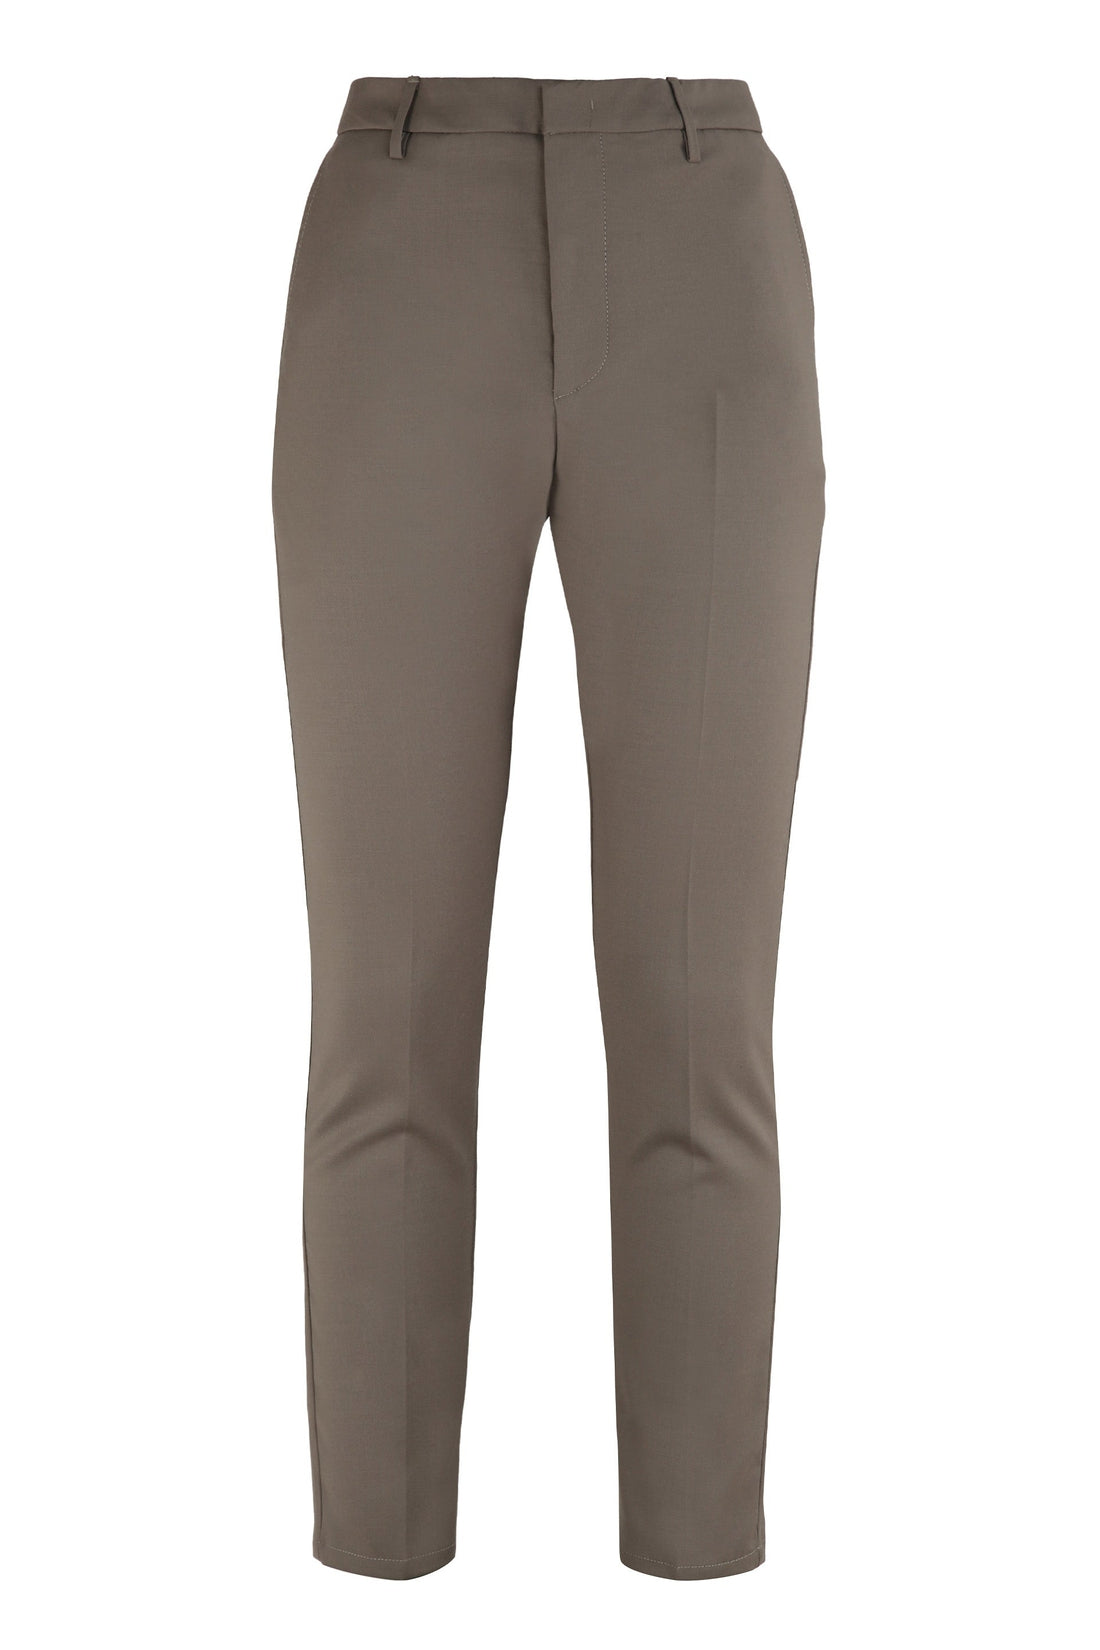 Dondup-OUTLET-SALE-Ral stretch wool trousers-ARCHIVIST